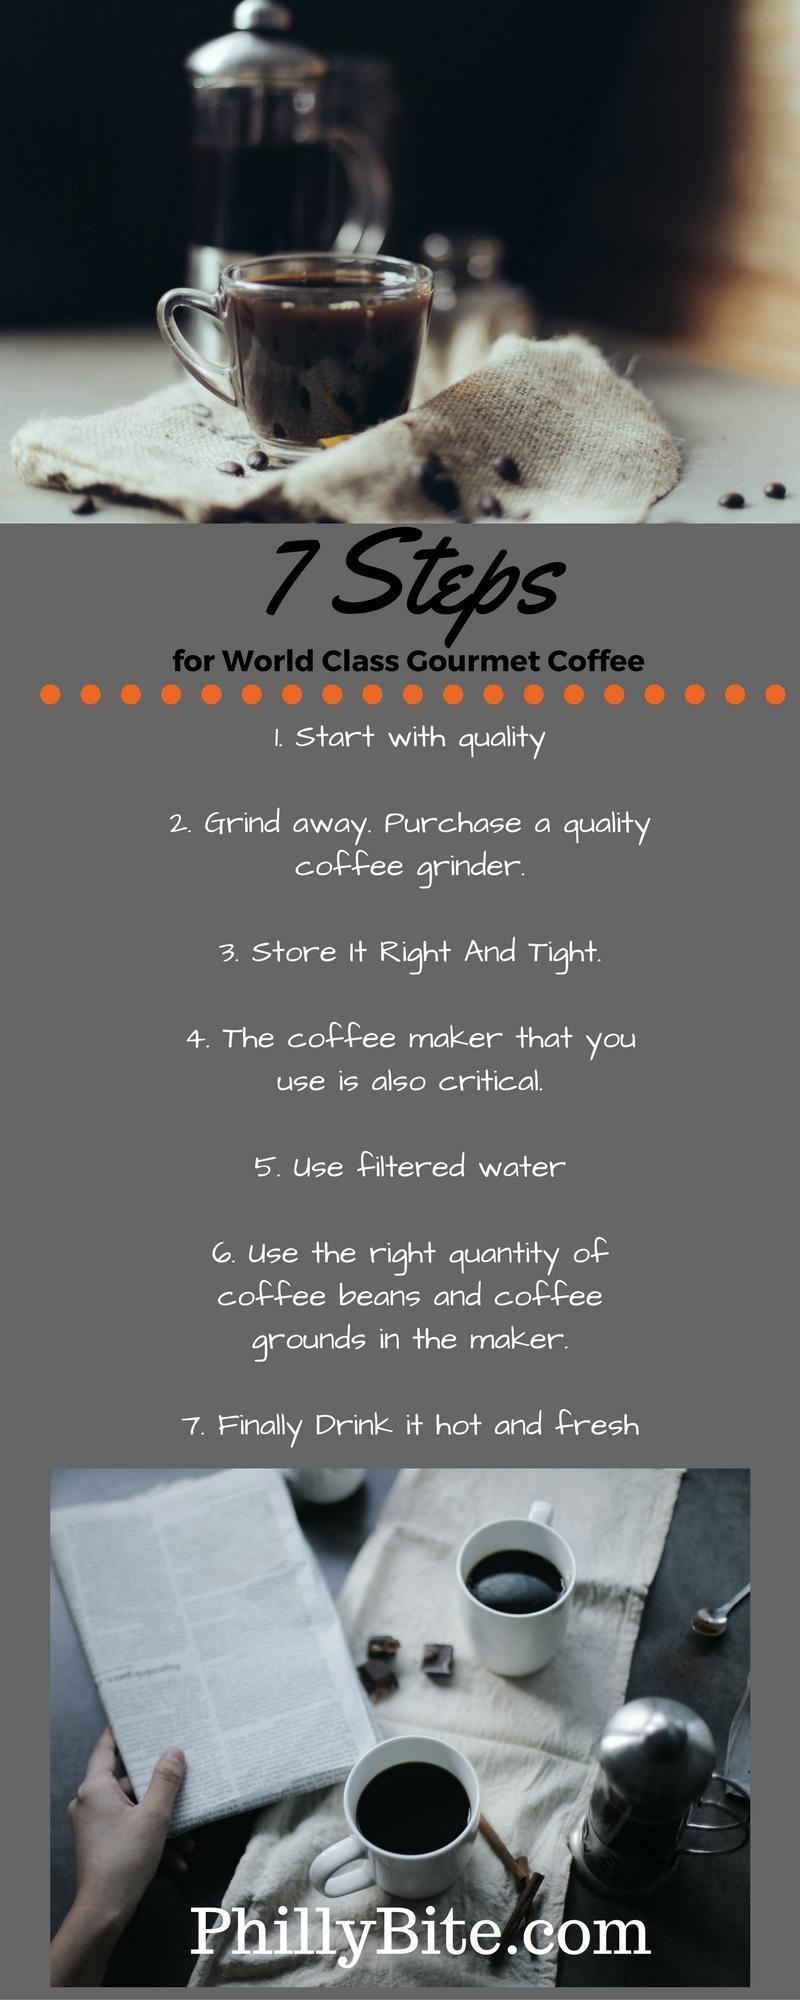 Here are 7 simple steps that you can take to produce the perfect cup of coffee every time.  Start with quality. One of the most critical aspects of coffee drinking is the grade of the coffee that you start off with. If you have a favorite flavor, then purchase whole beans in that flavor. If you can do this, it will allow you to get the most fresh coffee accessible.  Grind away. Purchase a quality coffee grinder. Some of the best grinders available today are easy to use and easy to clean up. By grinding your own coffee beans, youll be able to only grind what you need, meaning that you will have complete freshness in your coffee.  Store It Right And Tight. It is very fundamental to store your coffee tightly. Air oxidizes the coffee and can make it to get bitter quickly. Metal canisters can also enable a metal taste to get into the coffee, making it taste bad.